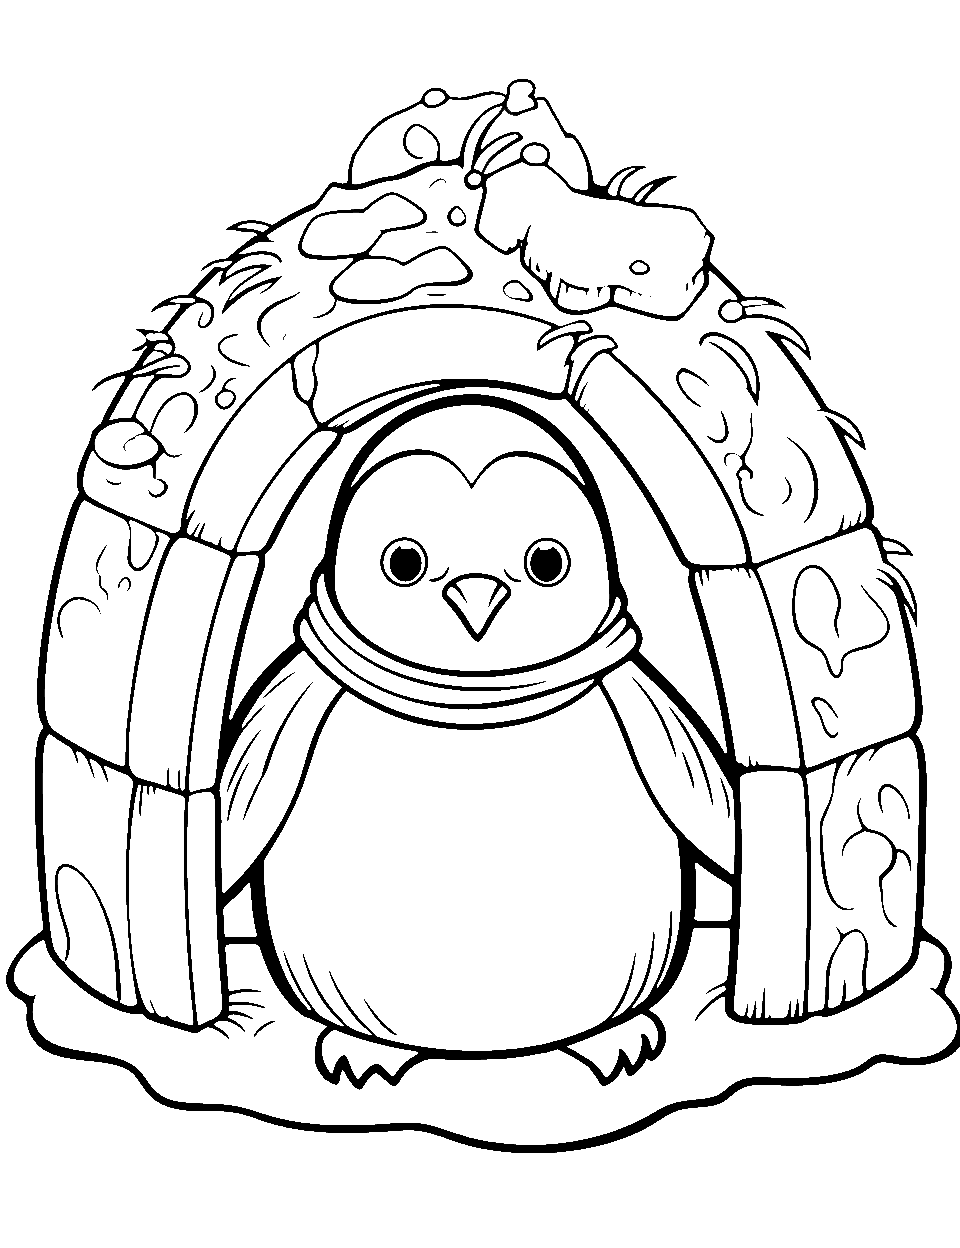 Penguin's Cozy Igloo Coloring Page - A penguin peeking out of a small ice igloo.